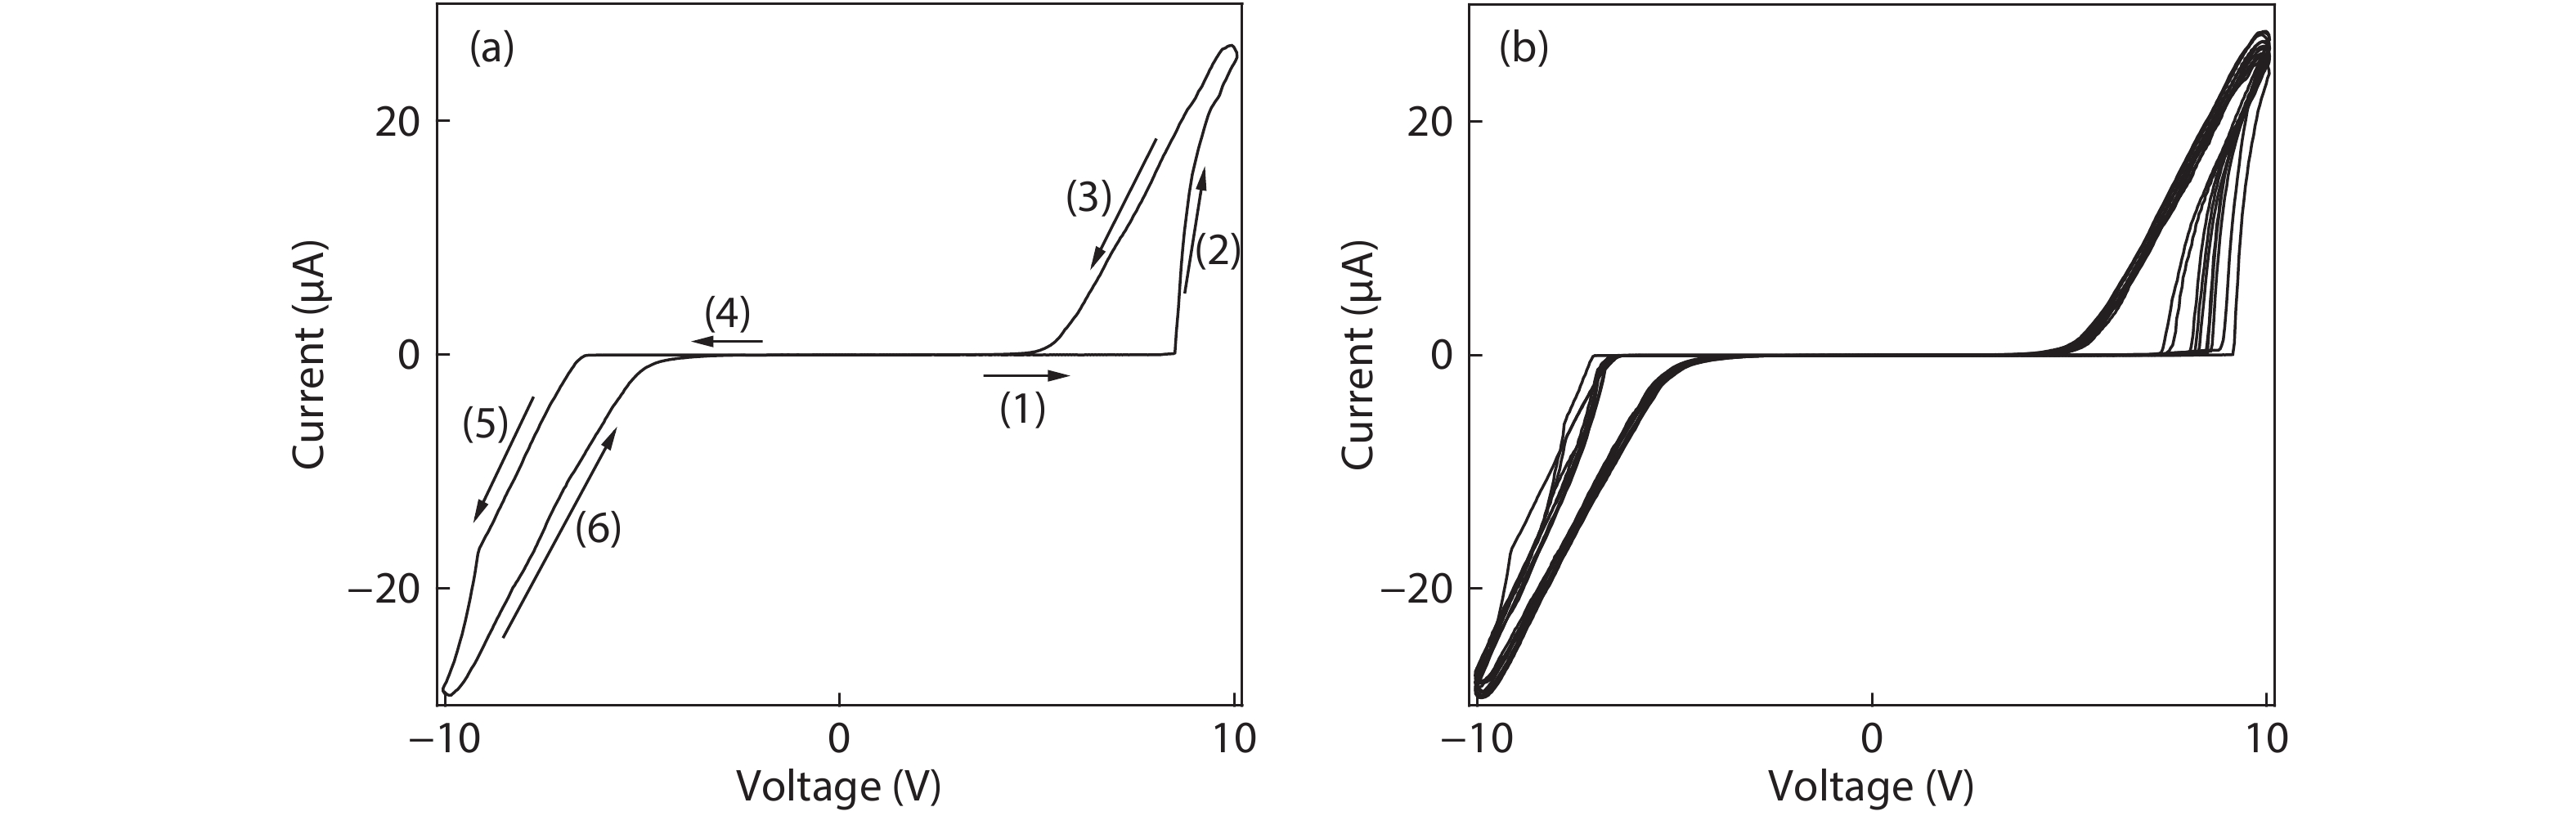 I–V characteristics of an individual SnO2:Sm nanowire-based two-terminal device at 10 V bias voltage. (a) Typical I–V cyclic curve. The numbered arrows 1–6 indicate the direction of voltage sweeping. (b) 10 consecutive I–V cyclic curves, showing an excellent stability and repeatability.